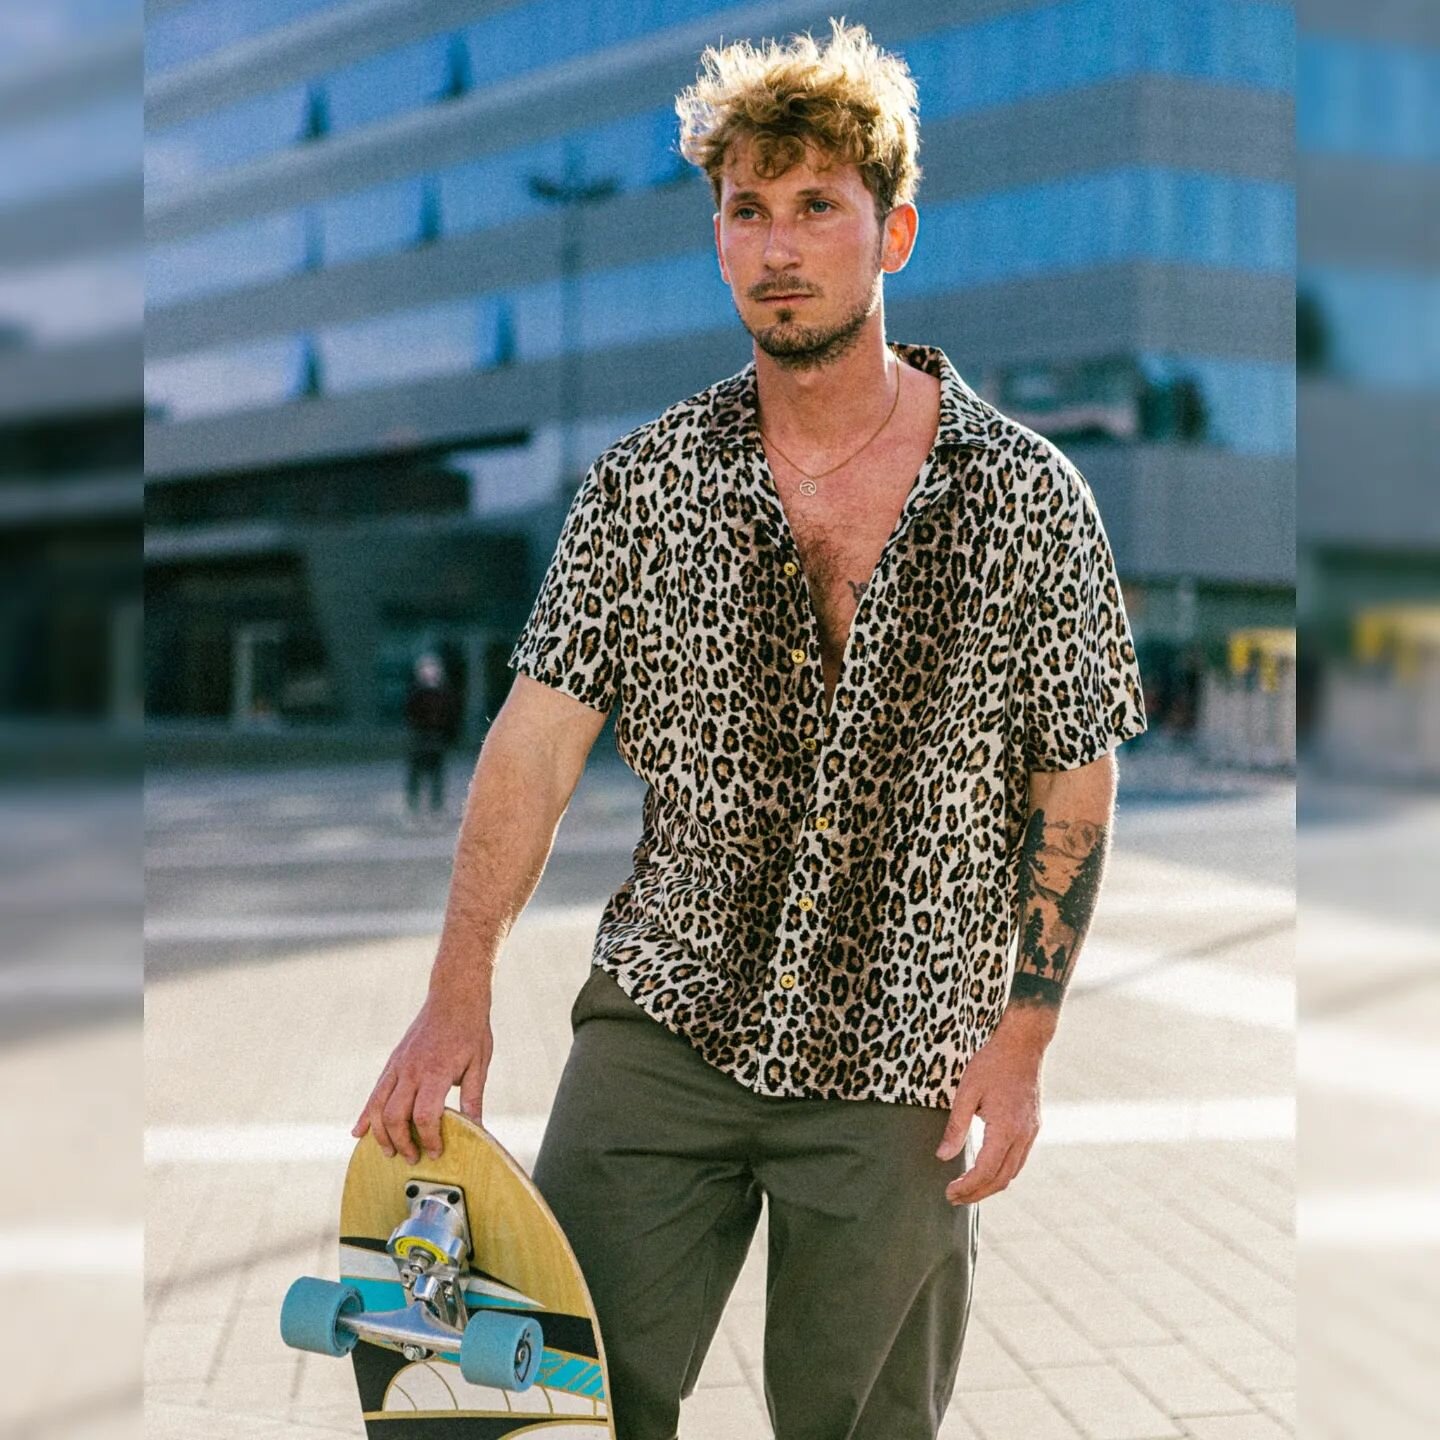 Surfing the city in wild style&rdquo;

Surfskate with
@edoardoomanzo &amp;
@the_marcoioa

The special pants edition just dropped!

Speedflow and ride punk
Pants, always looking good, even in the middle of the asphalt.
😜
Surfing the street 

Thank&rs